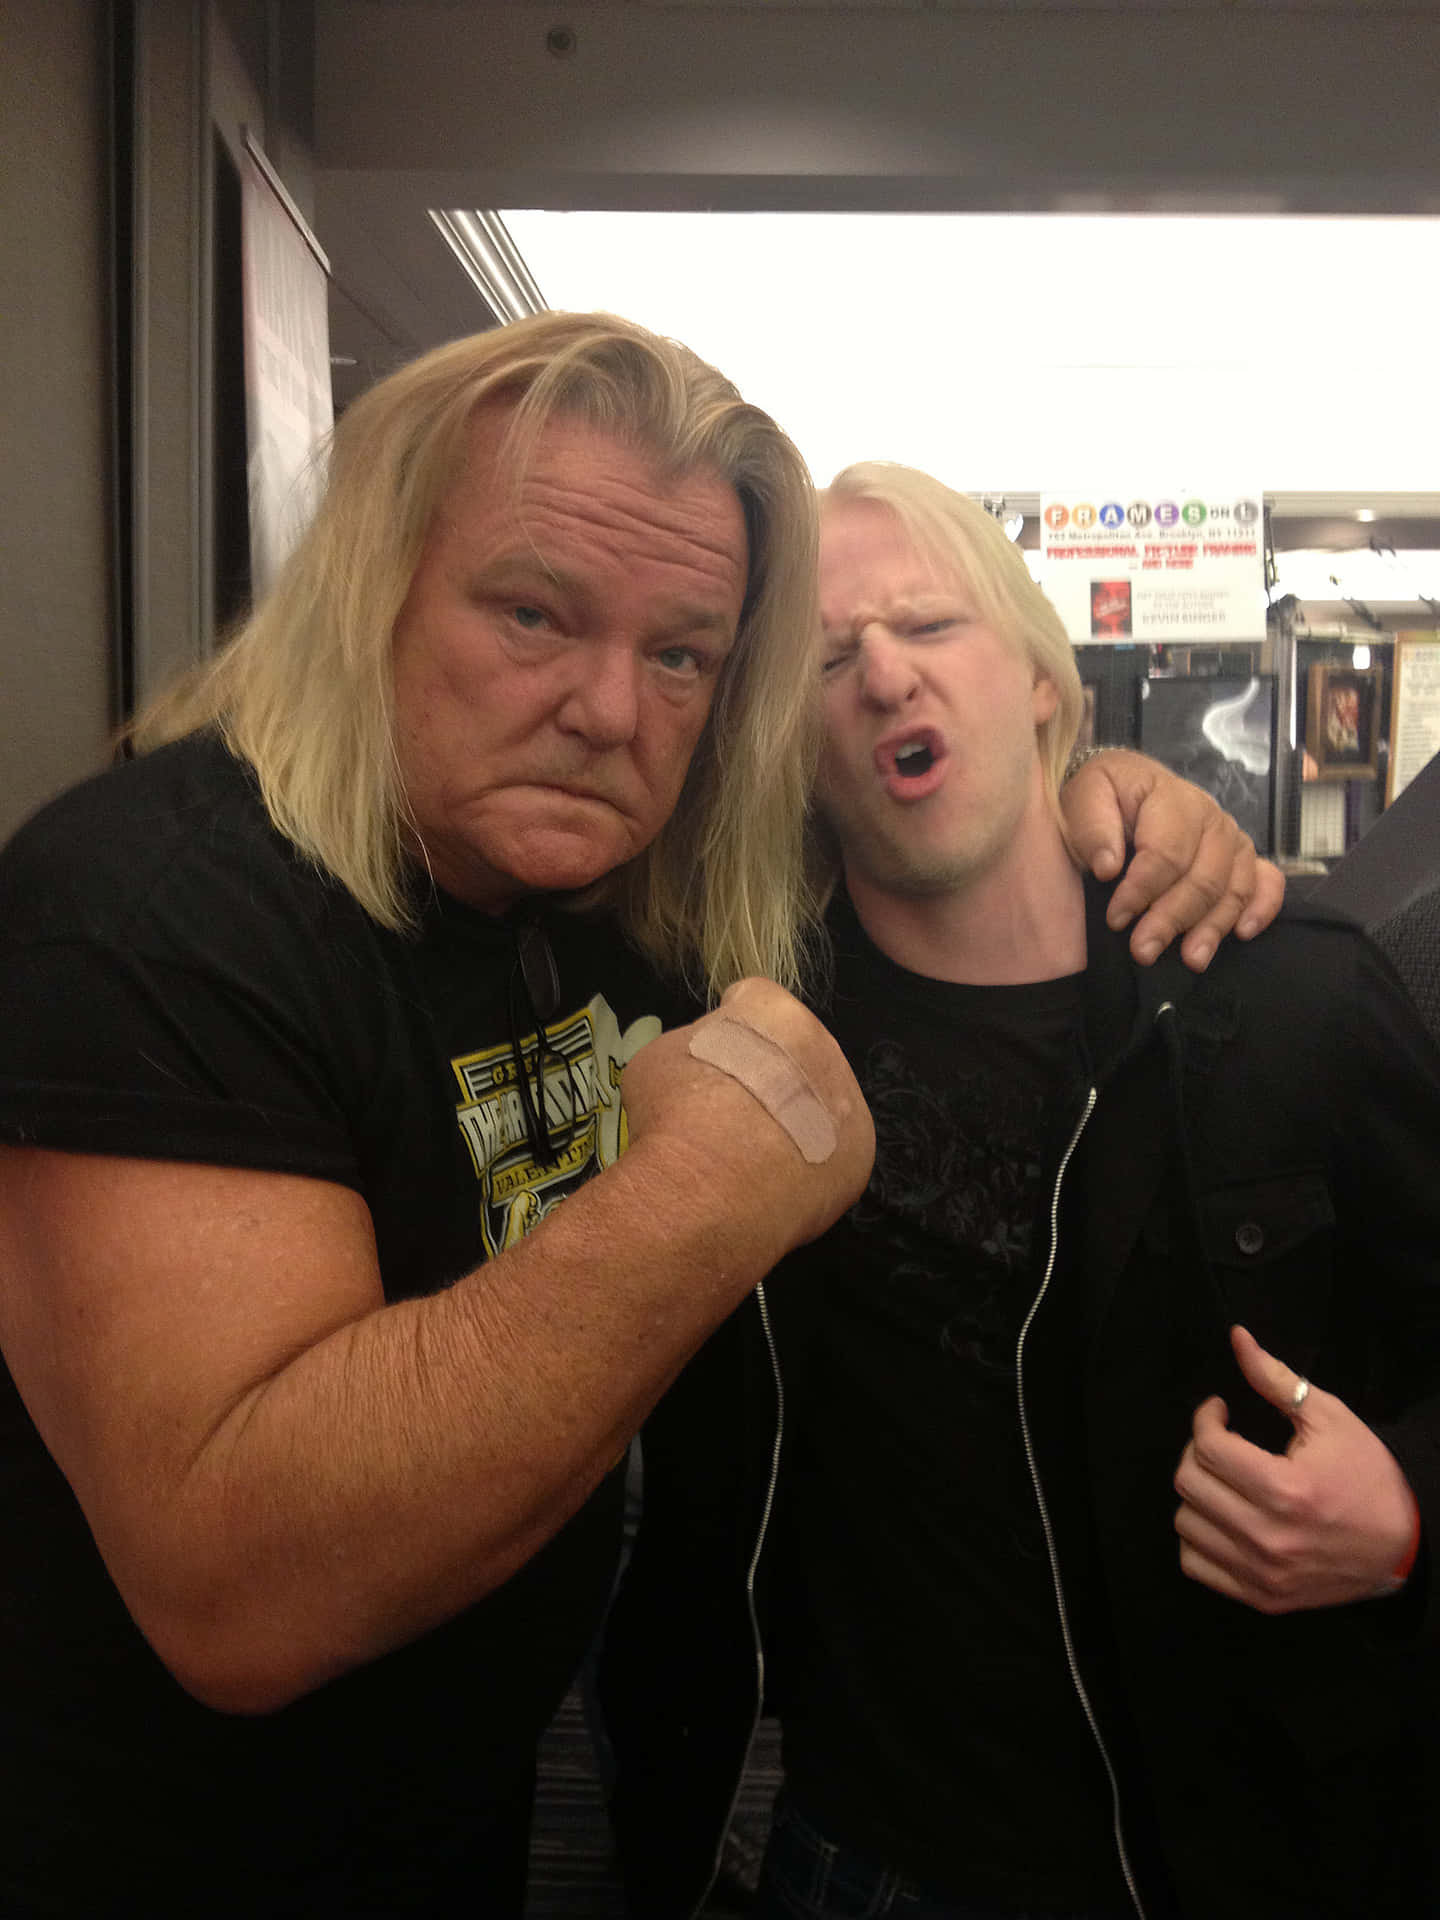 Gregvalentine & Chris Northrop Can Be The Perfect Choice For Your Computer Or Mobile Wallpaper. Sfondo